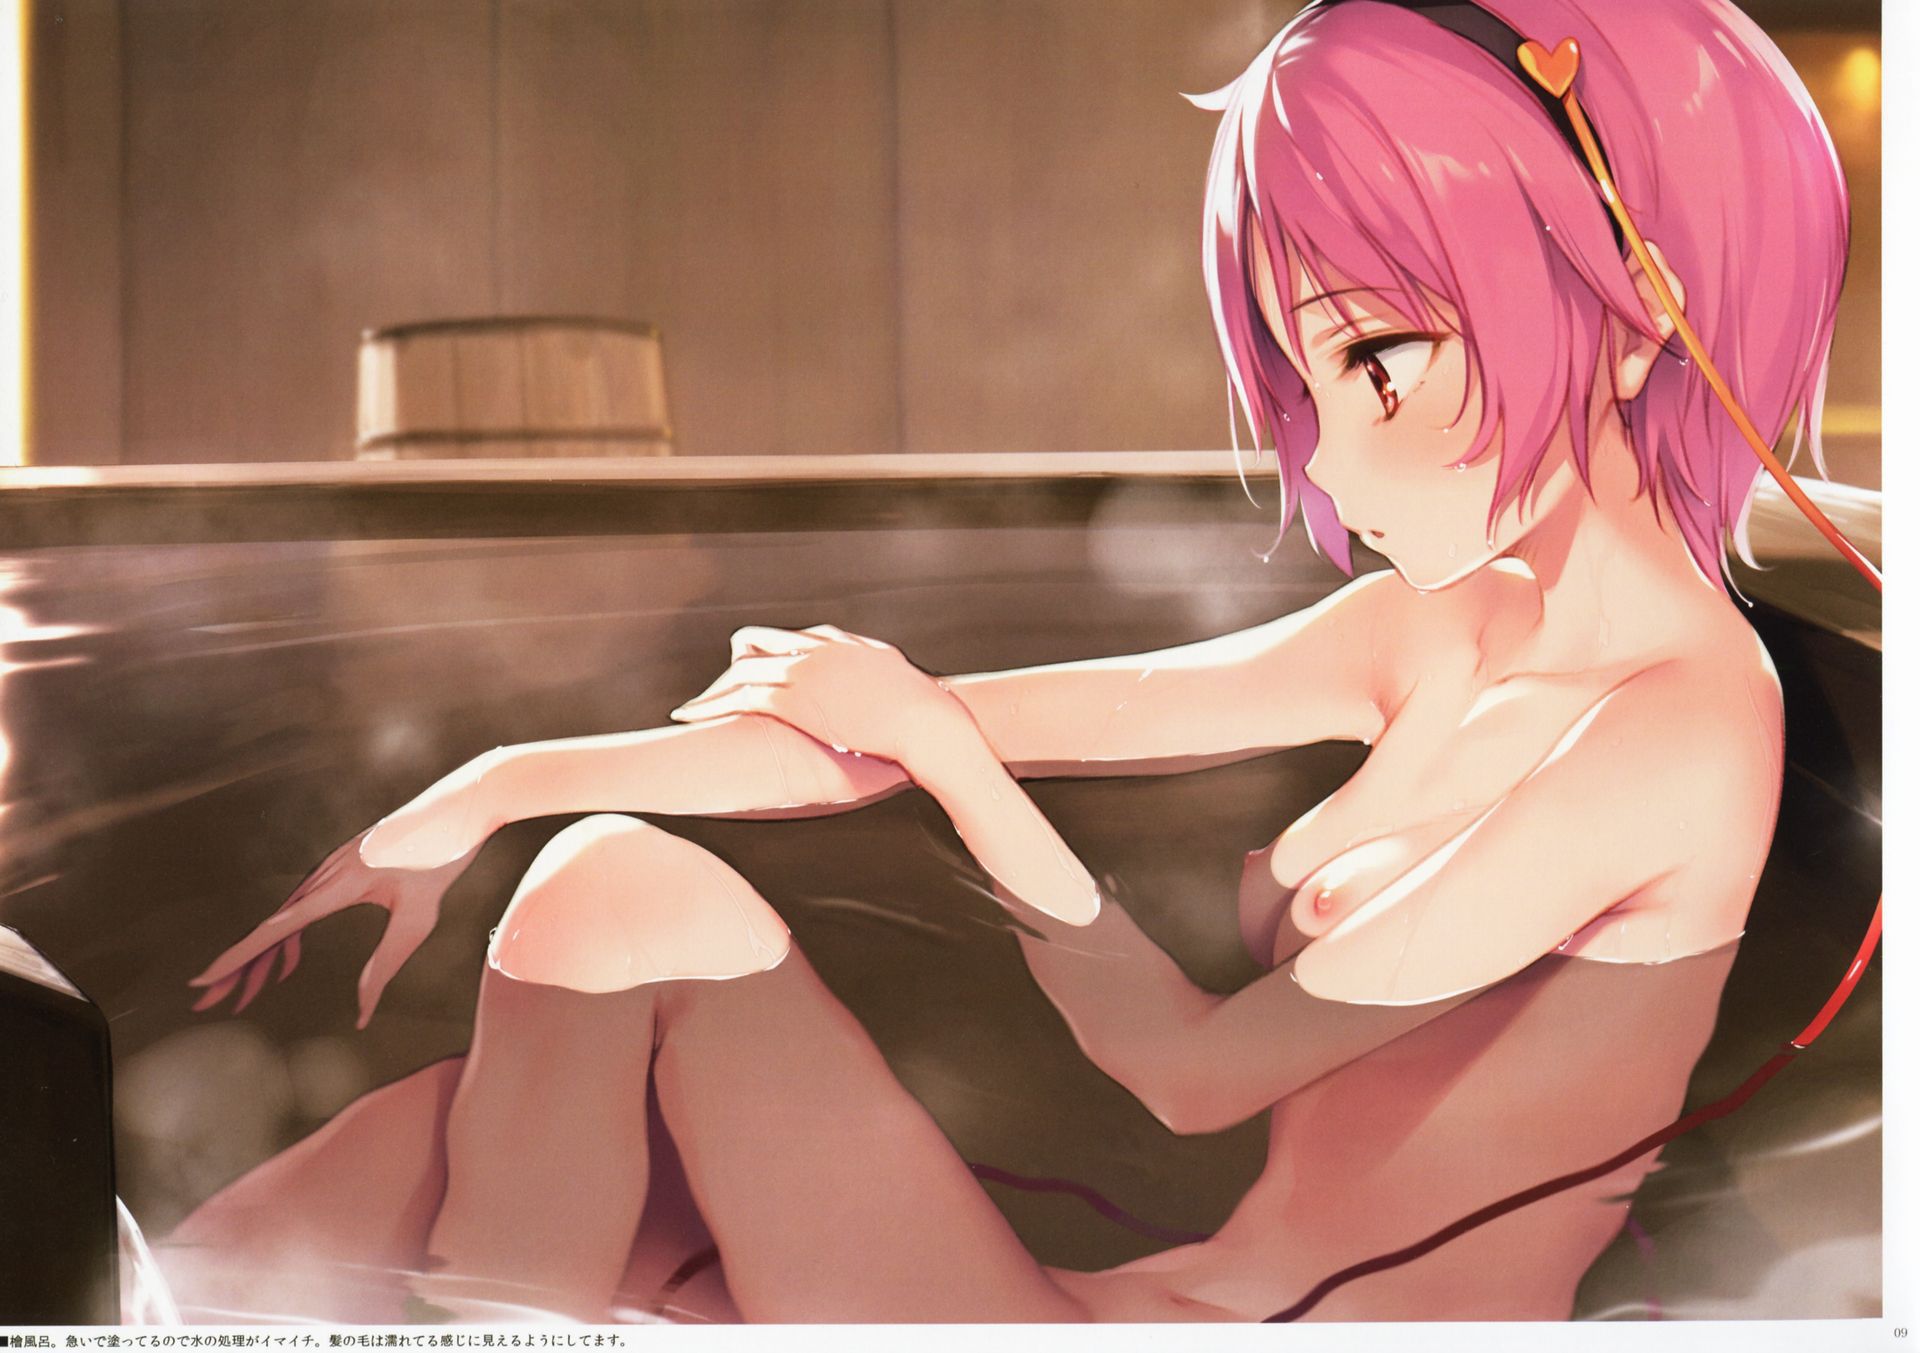 Do you want to see a naughty picture of a hot spring bath? 10